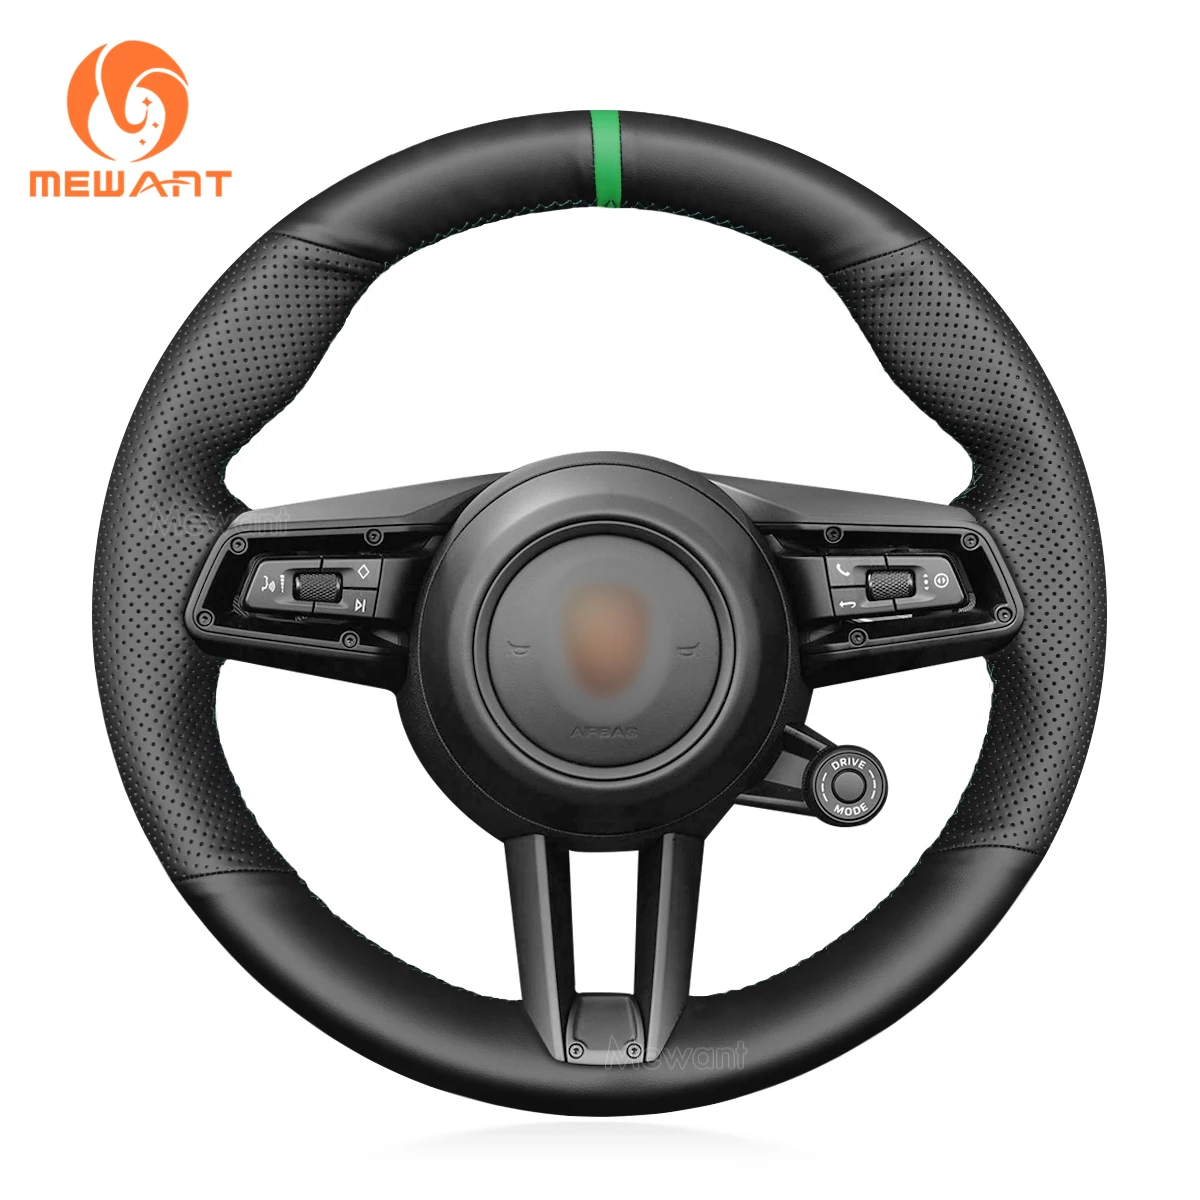 

Hand Stitching Black Leather Steering Wheel Cover for Porsche 911 992 Taycan 2020 2021 2022 2023